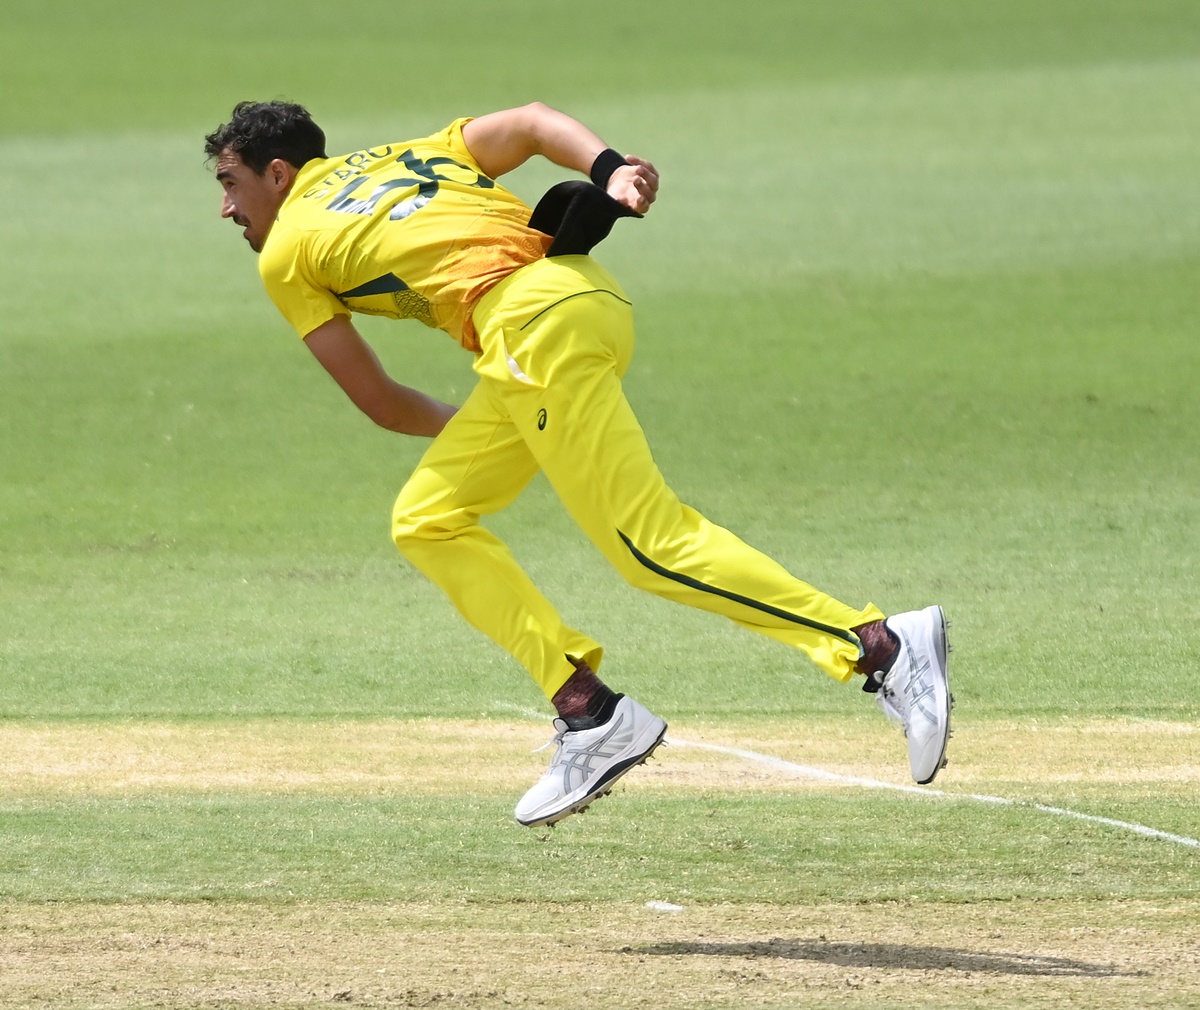 Australia pacer Mitchell Starc cleaned up Zimbabwe's top-order and finished with figures of 3-24 in the second the One Day International at Riverway Stadium in Townsville, Queensland, on Wednesday.